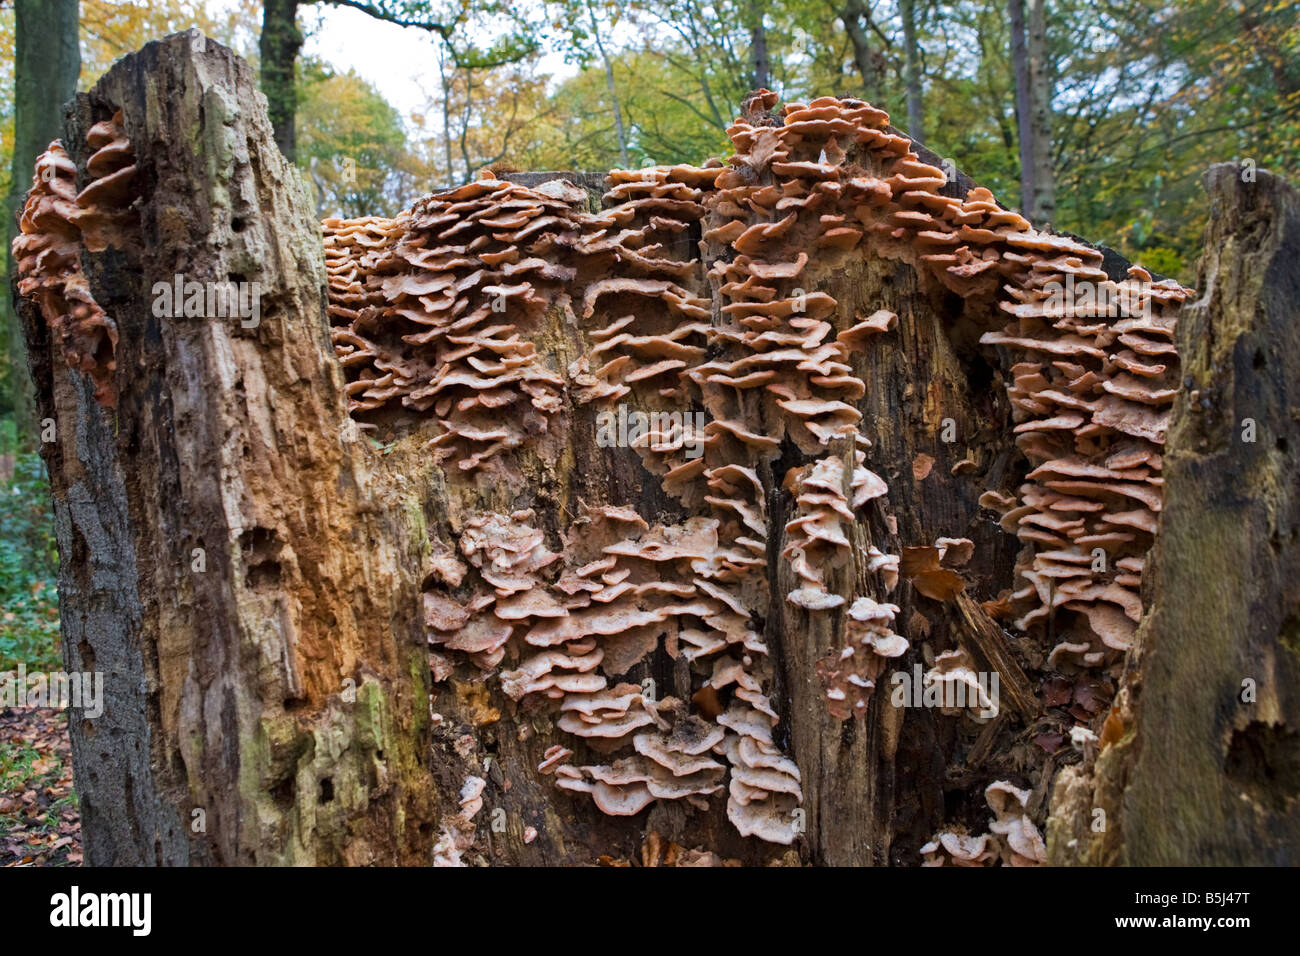 Fungus growing out of a tree stump Stock Photo